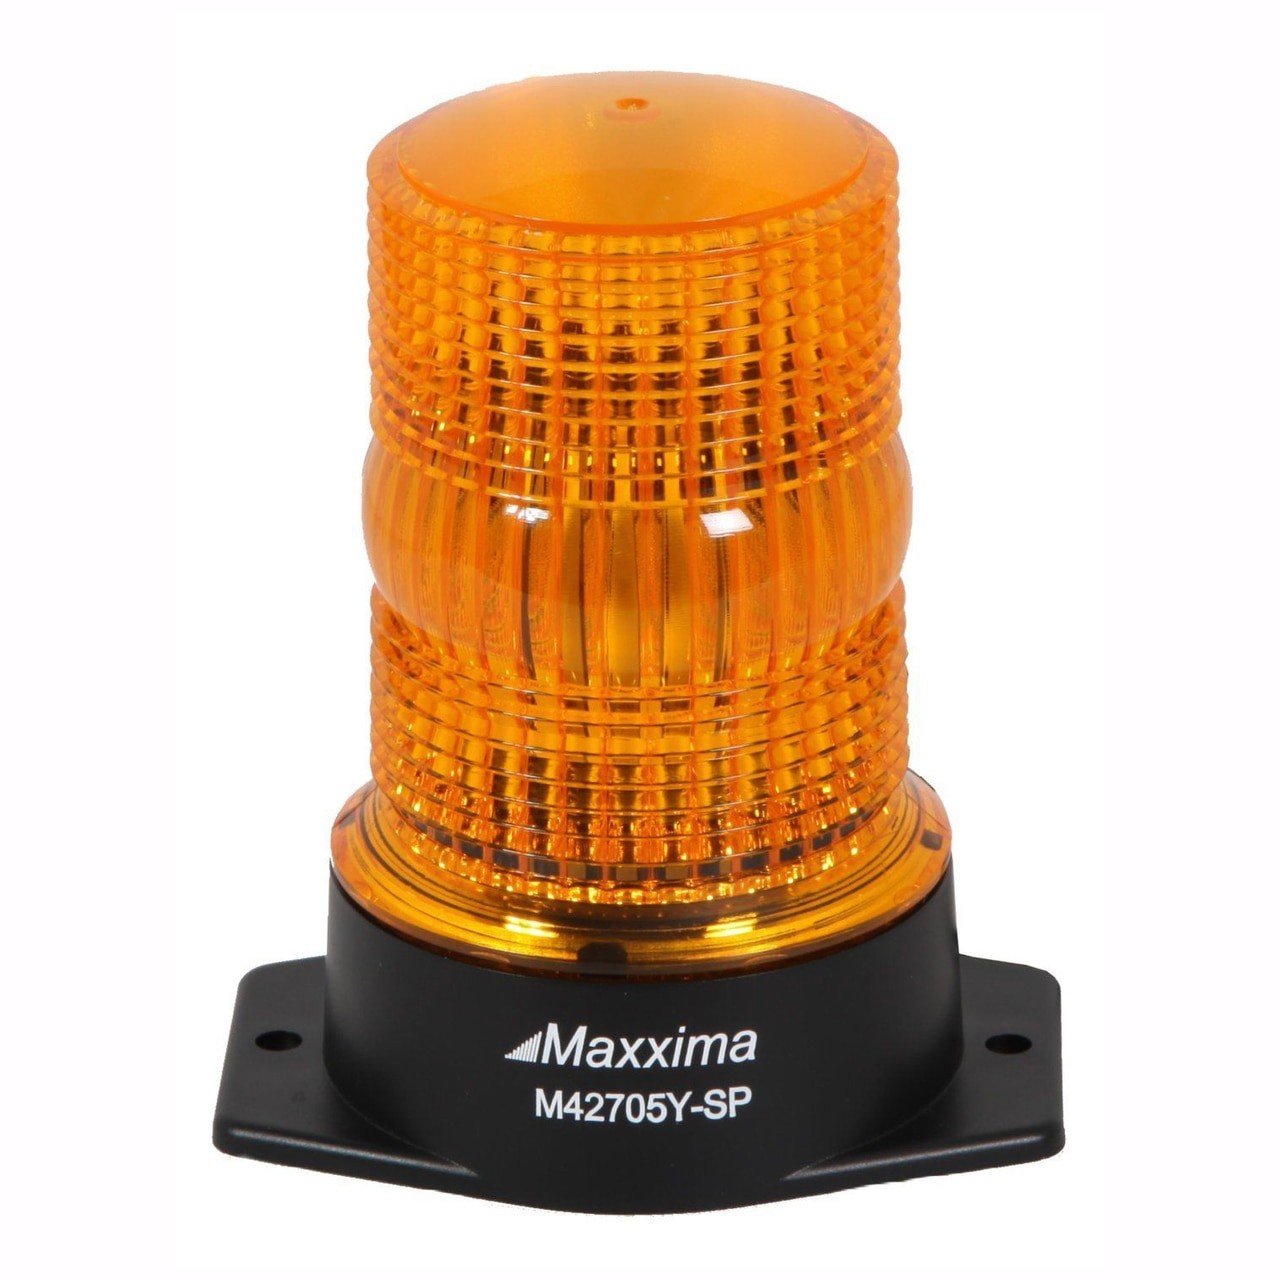 Maxxima M Y Amber 5" LED Beacon Warning Strobe Light with Surface Mount